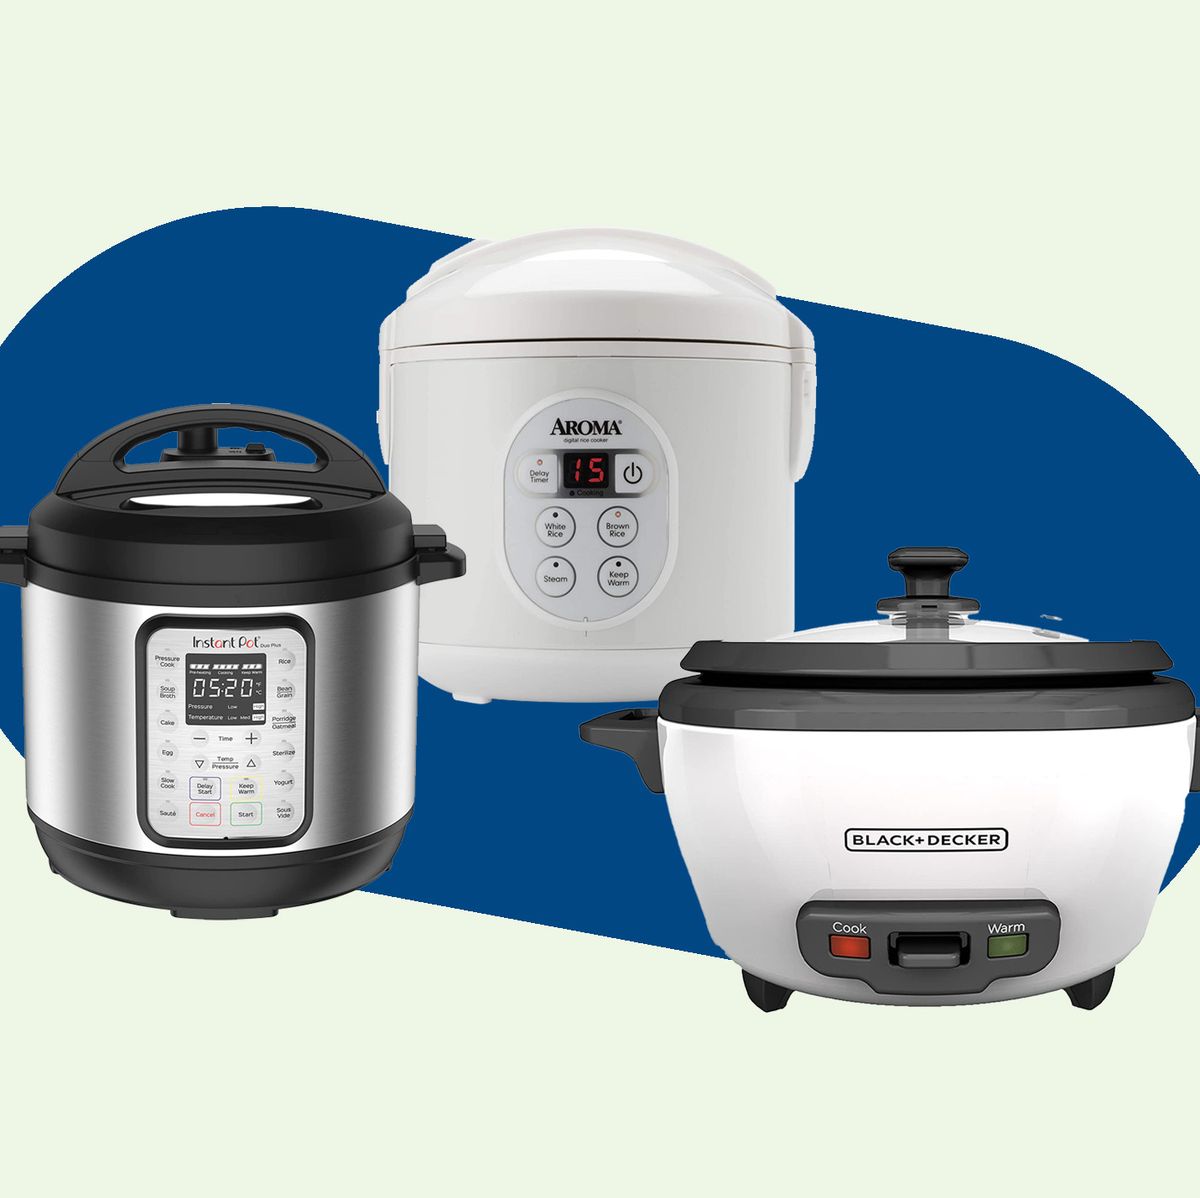 Top 5 Best Rice Cookers 2023 - Which One Should You Buy? 